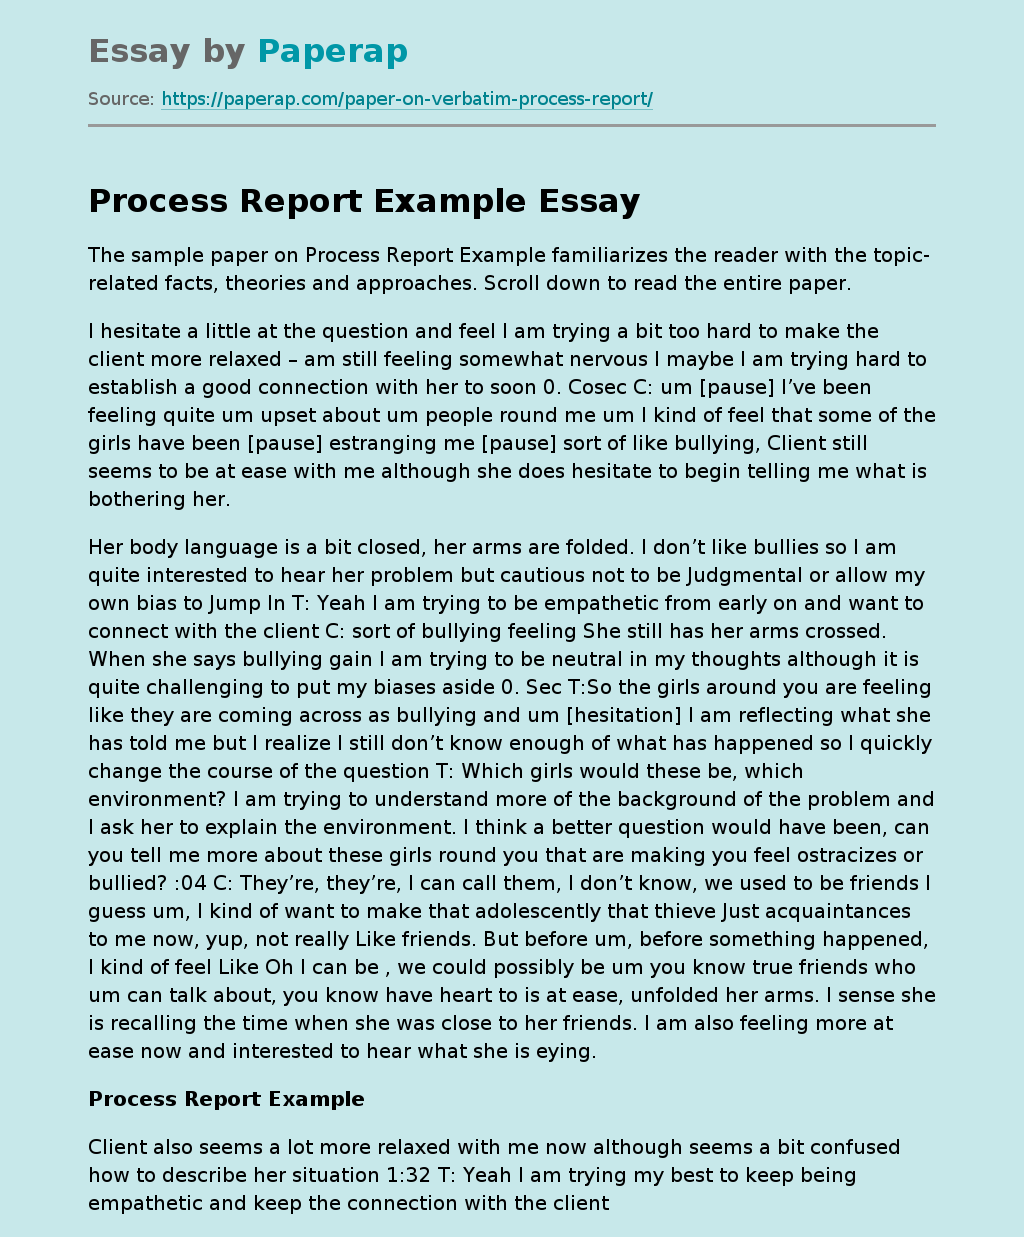 Process Report Example